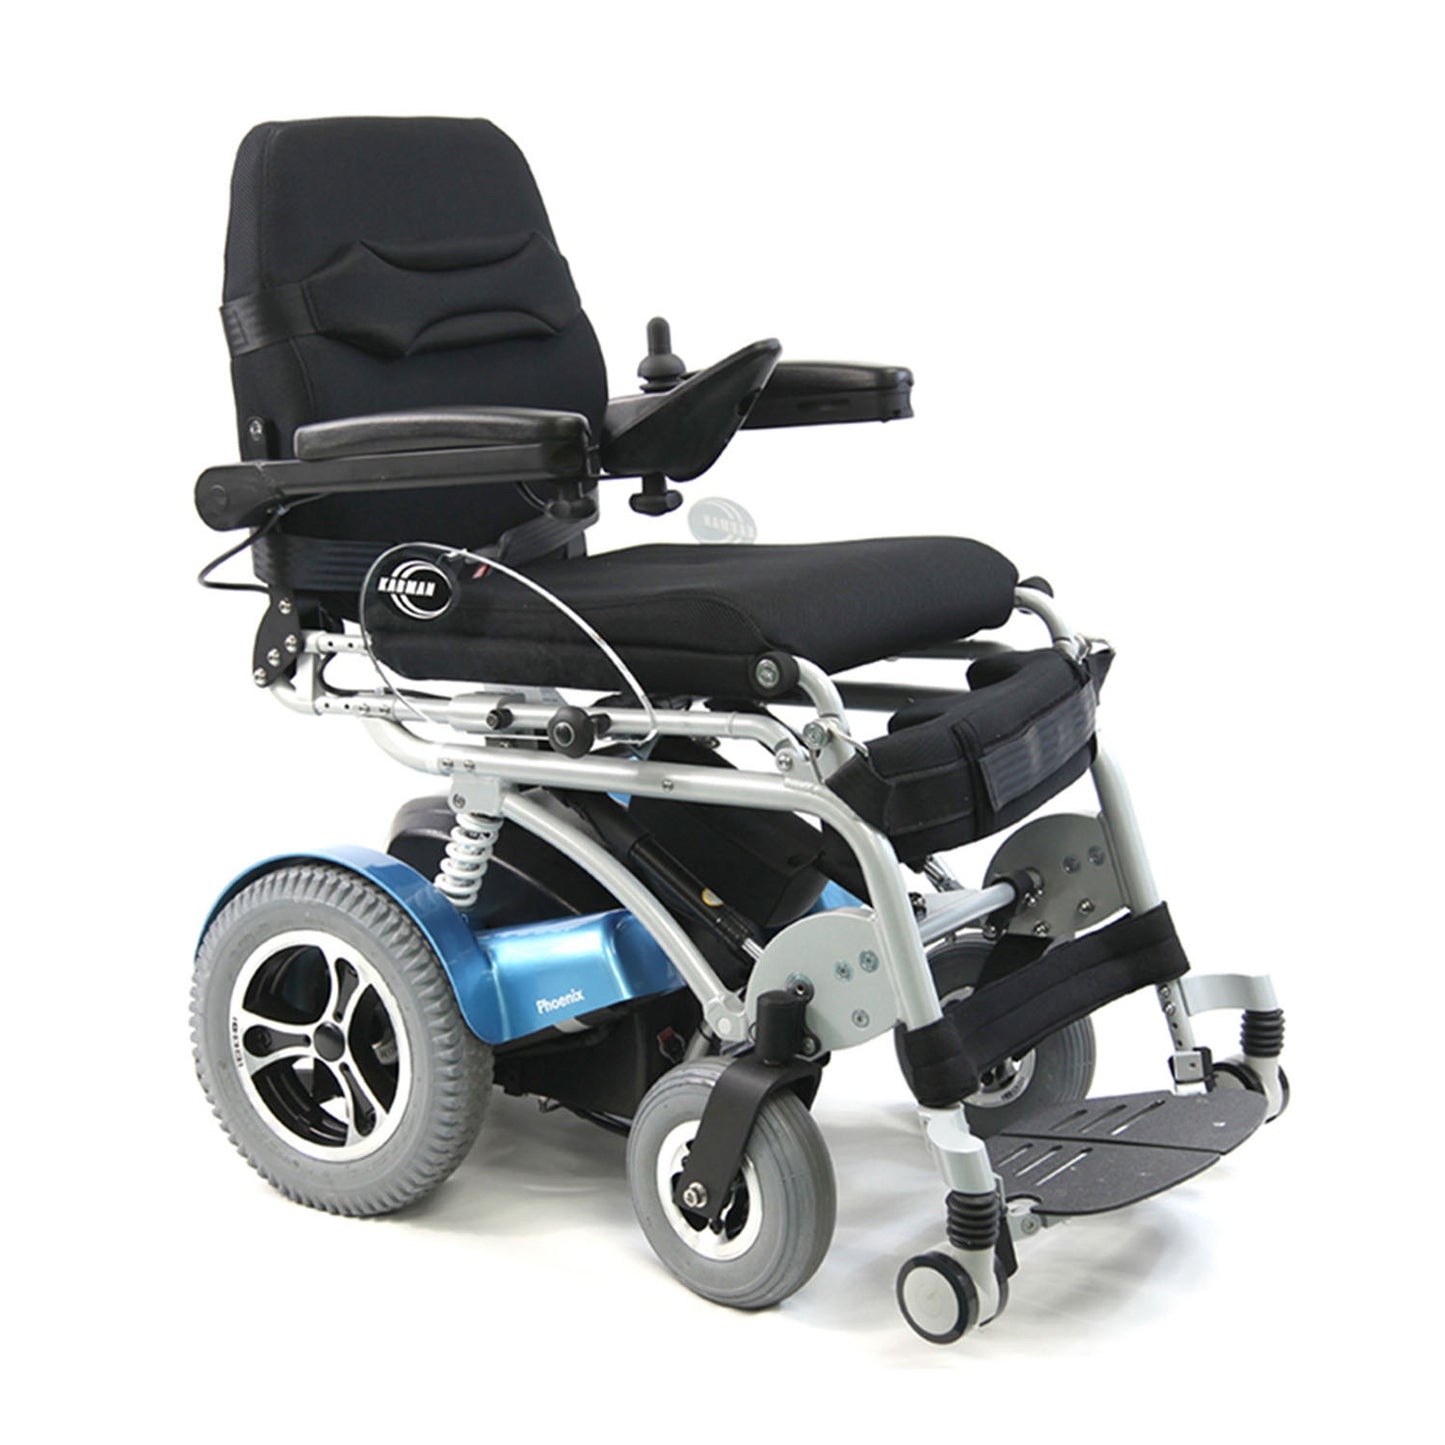 Karman XO-202 Full Power Stand Up Wheelchair, Runs Off 25 Miles Per Charge, 16 inch in Width, Aluminum Frame